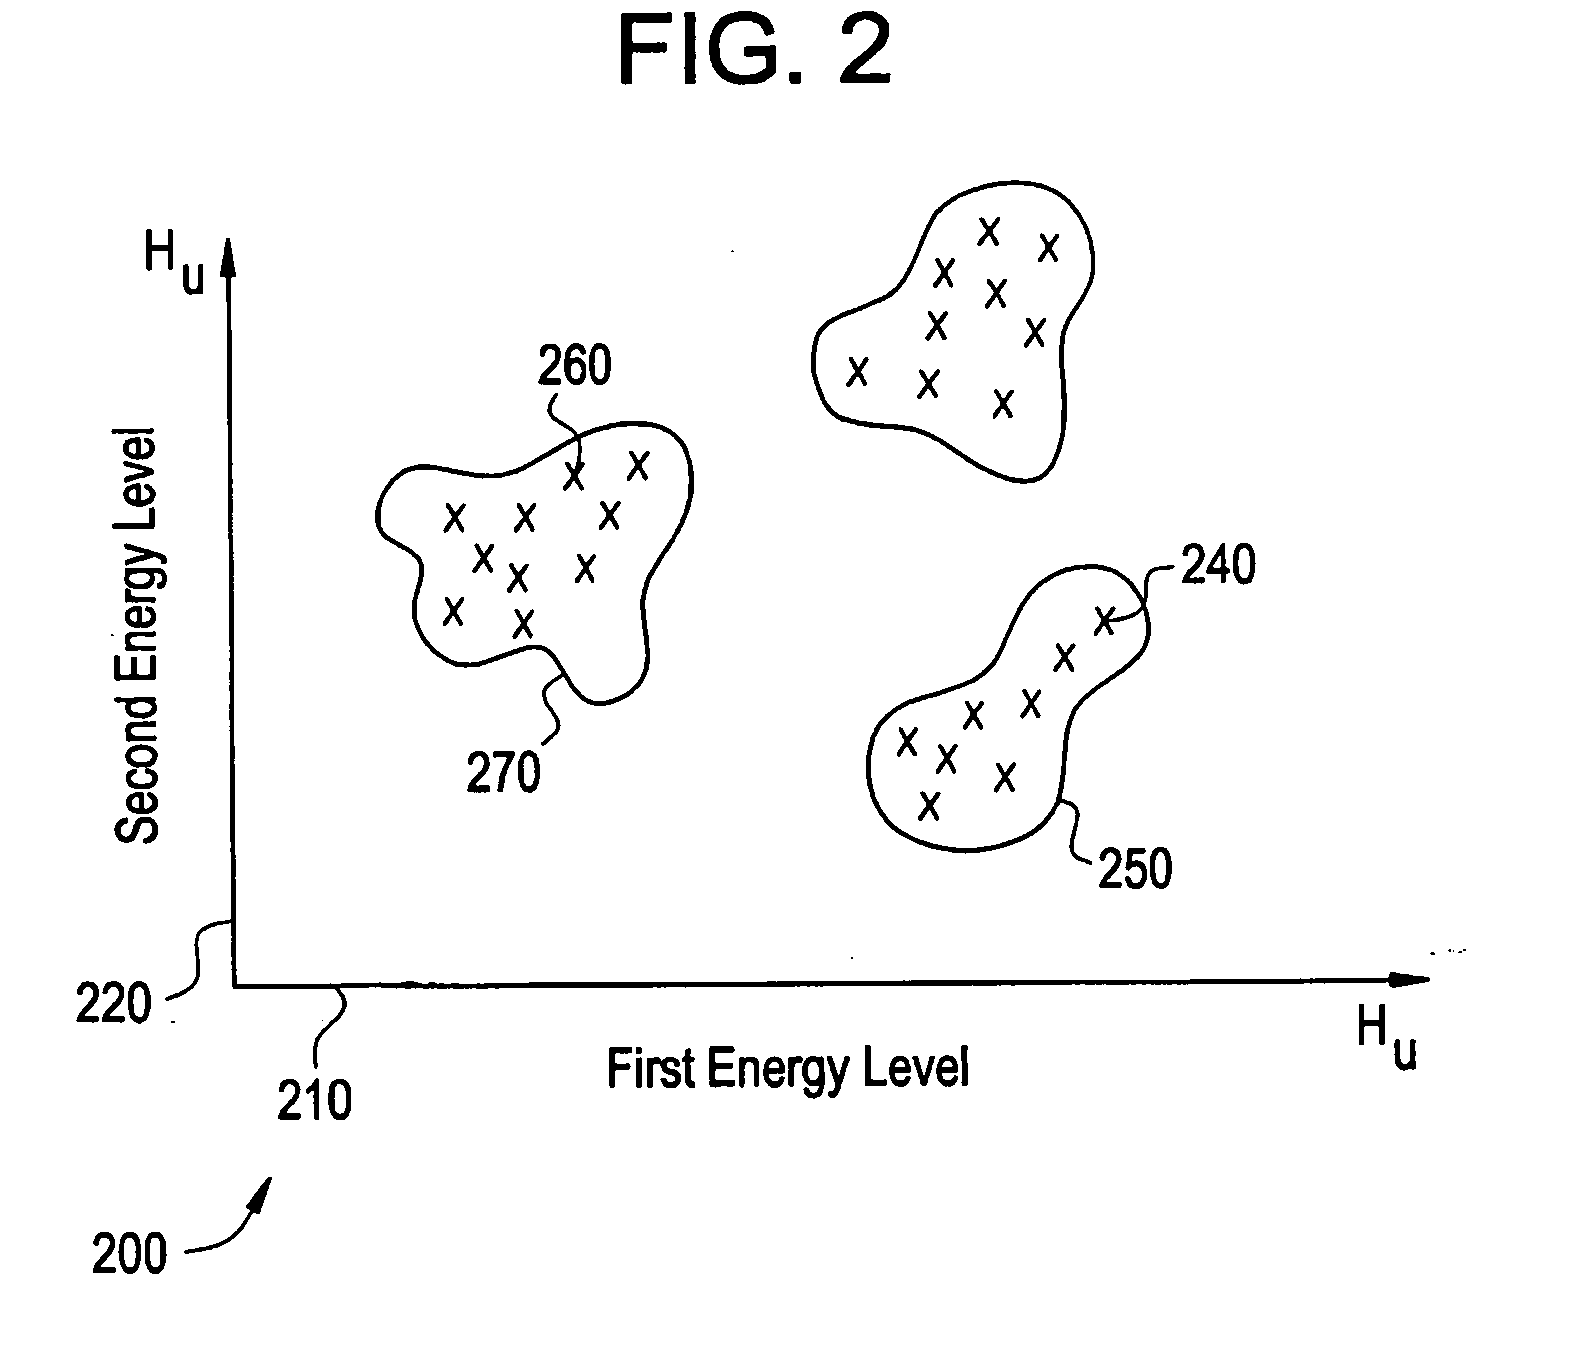 System and Method for Material Segmentation Utilizing Computed Tomography Scans